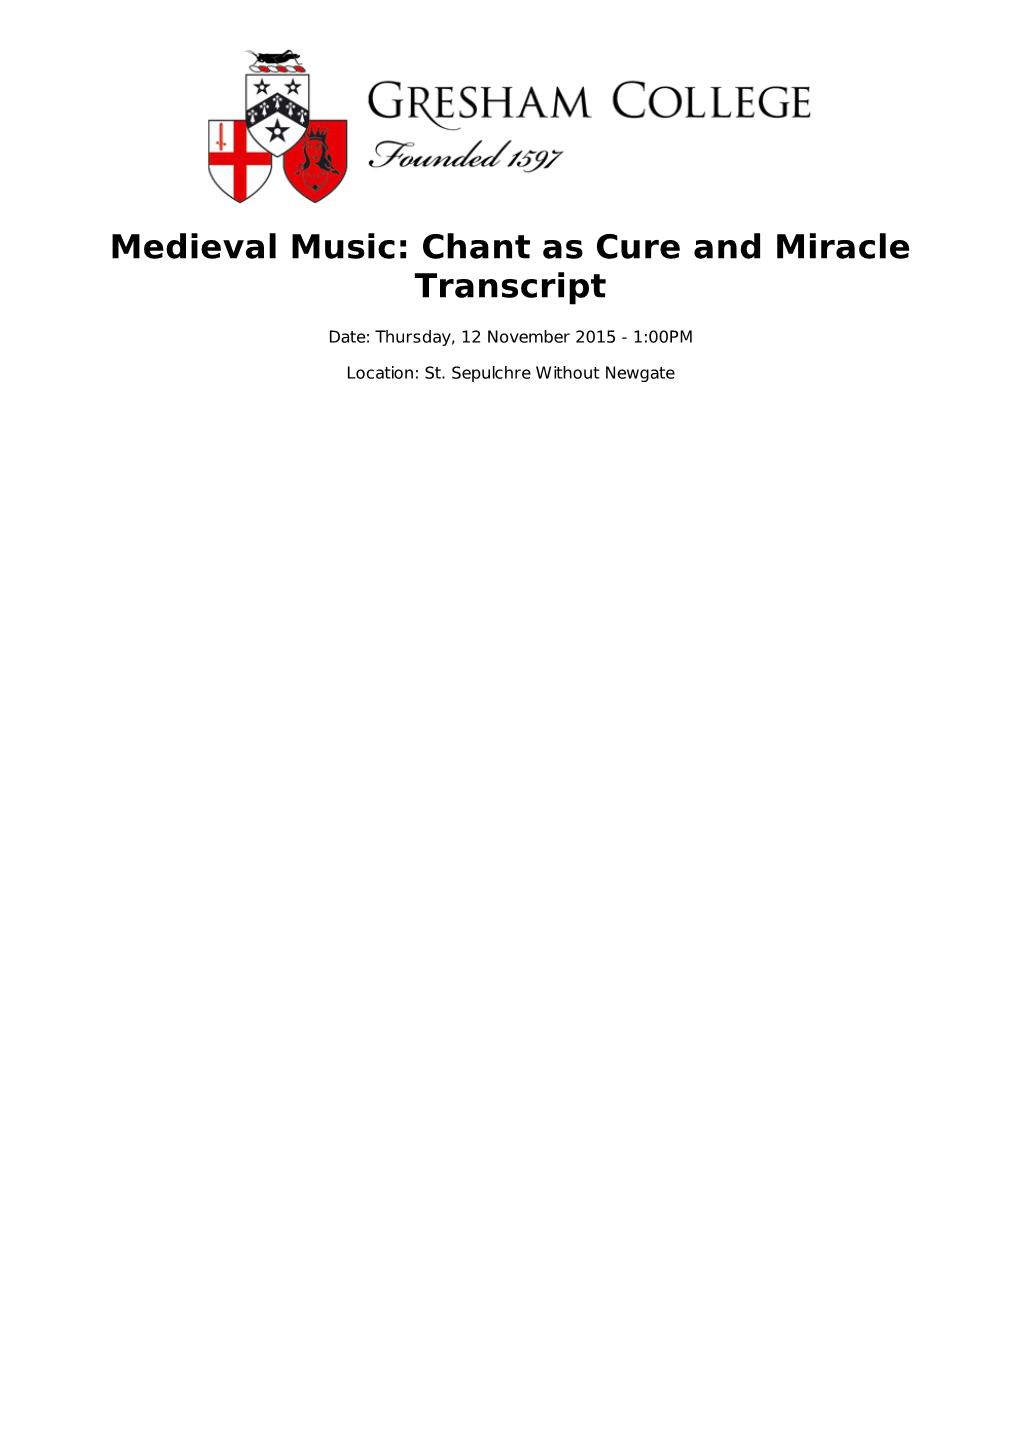 Medieval Music: Chant As Cure and Miracle Transcript